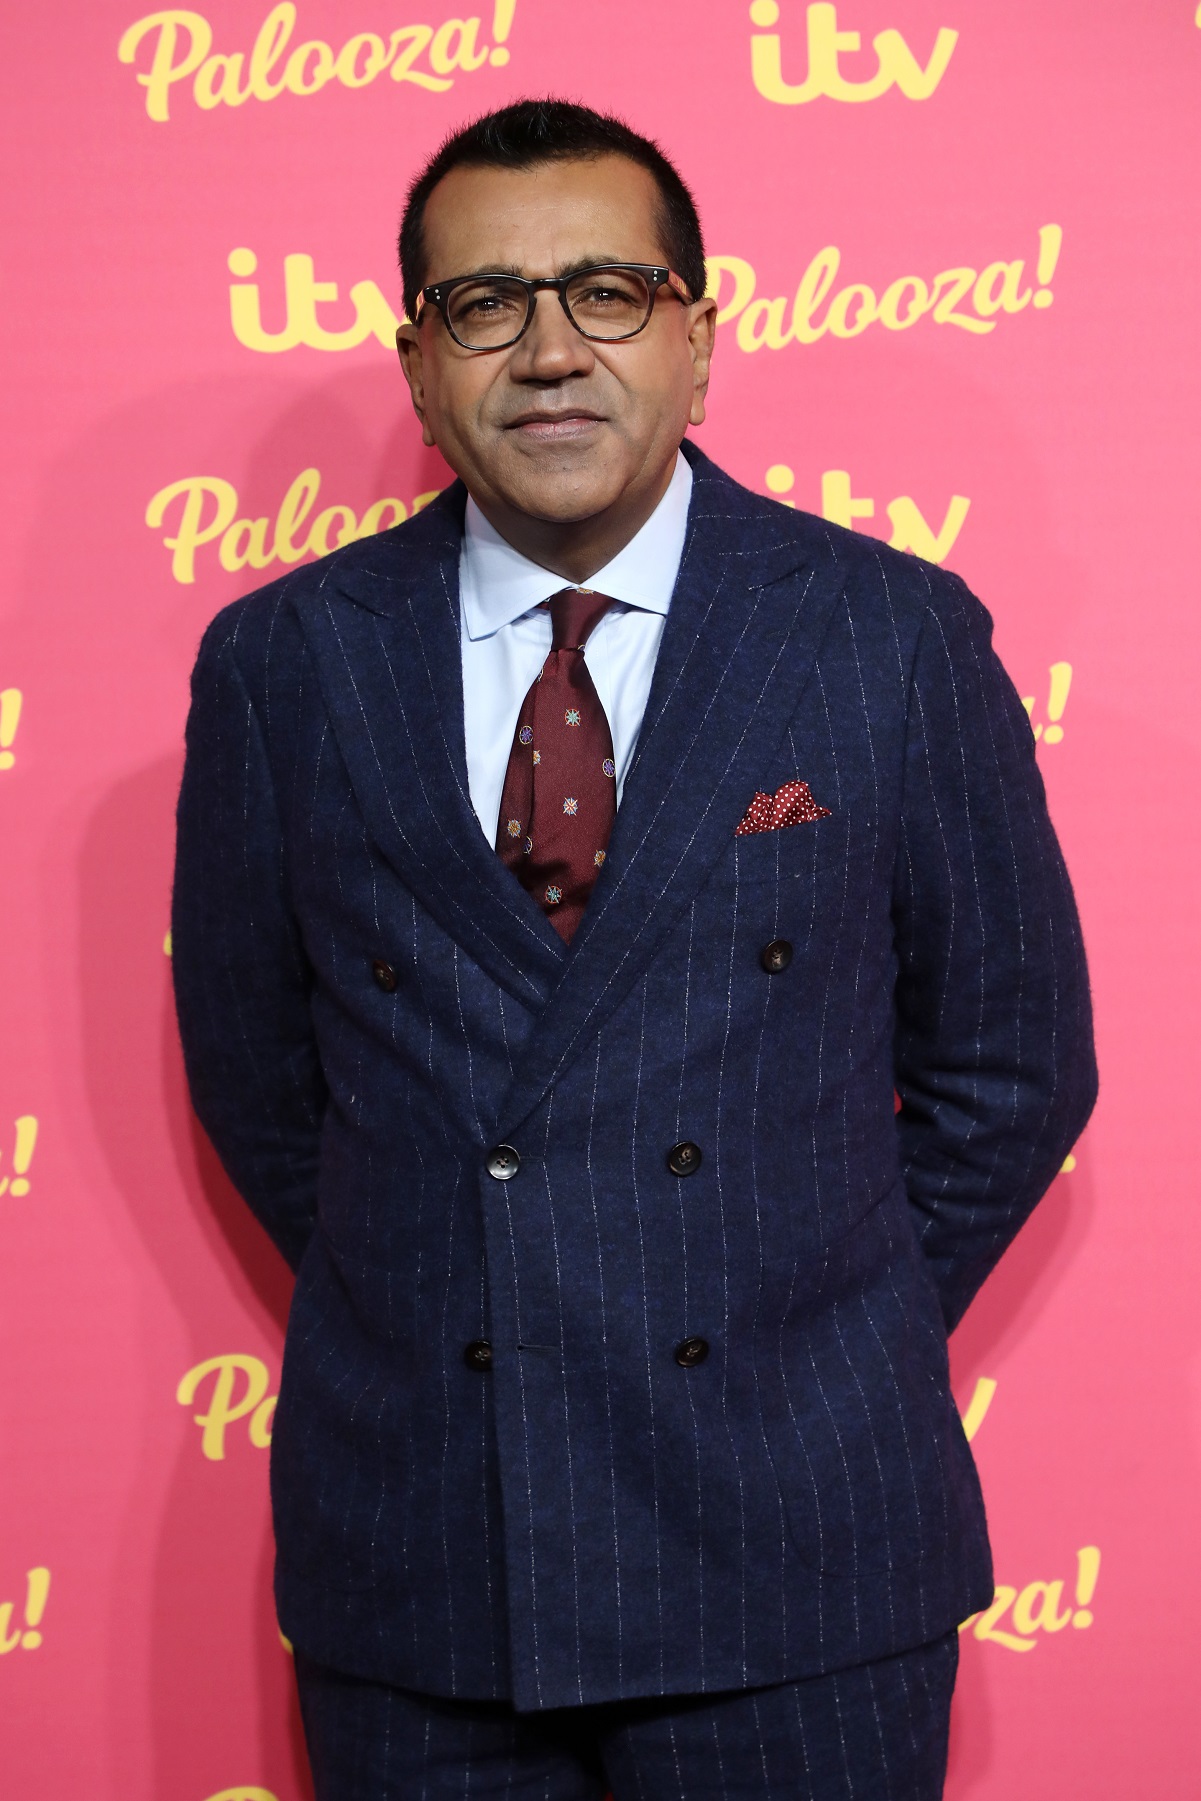 Martin Bashir dressed in a suit on the red carpet at the ITV Palooza